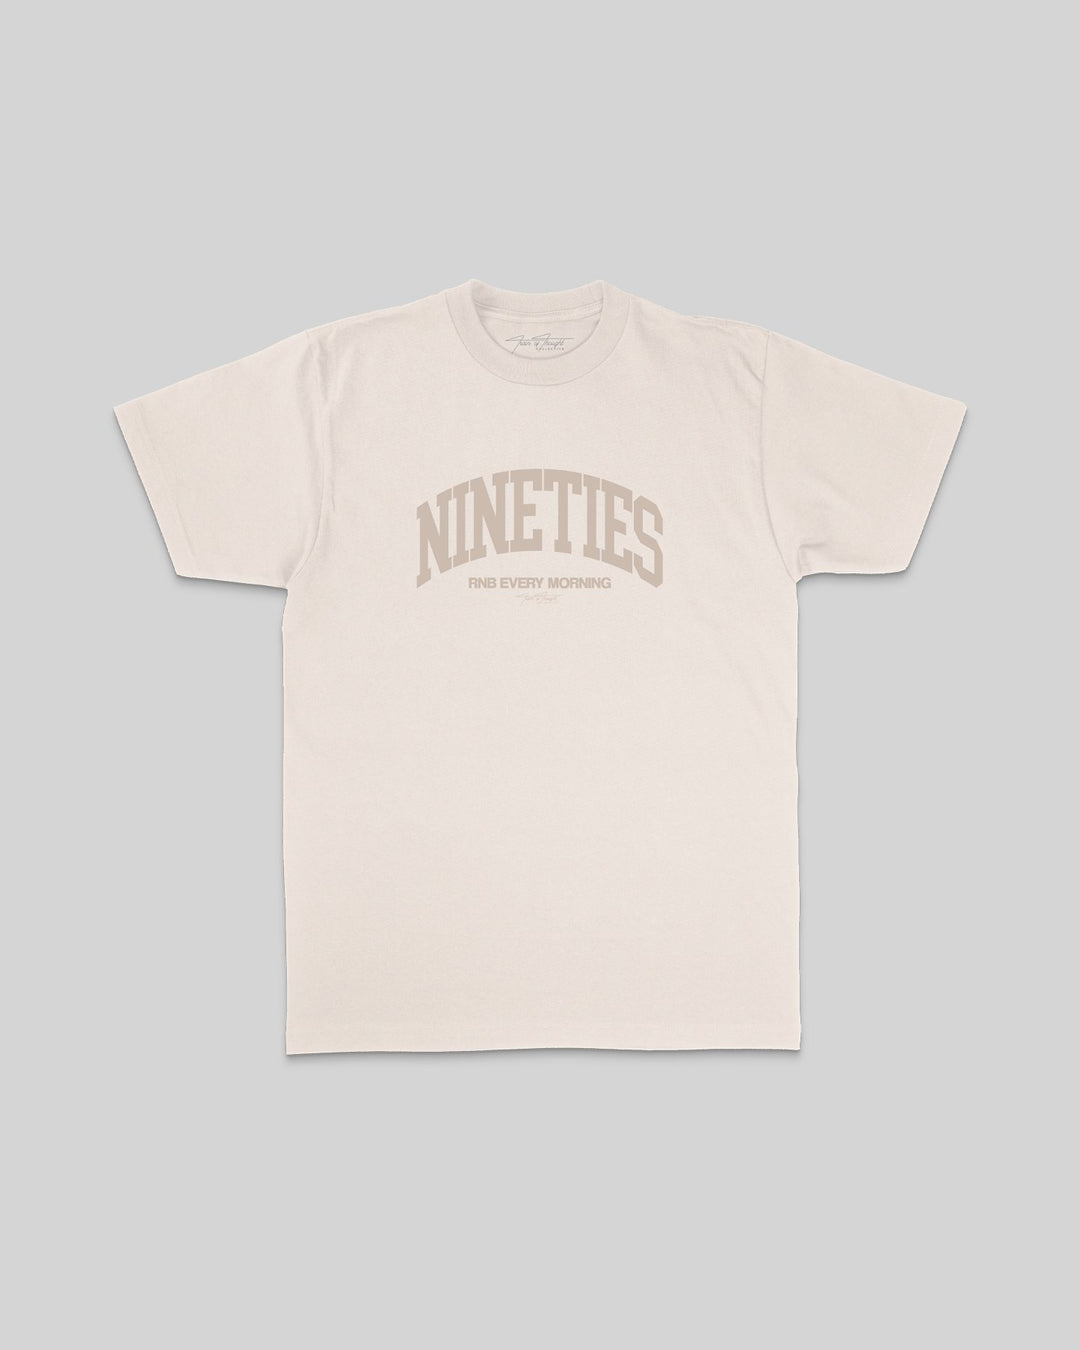 Nineties Rnb Every Morning Arch Cream Tee - trainofthoughtcollective